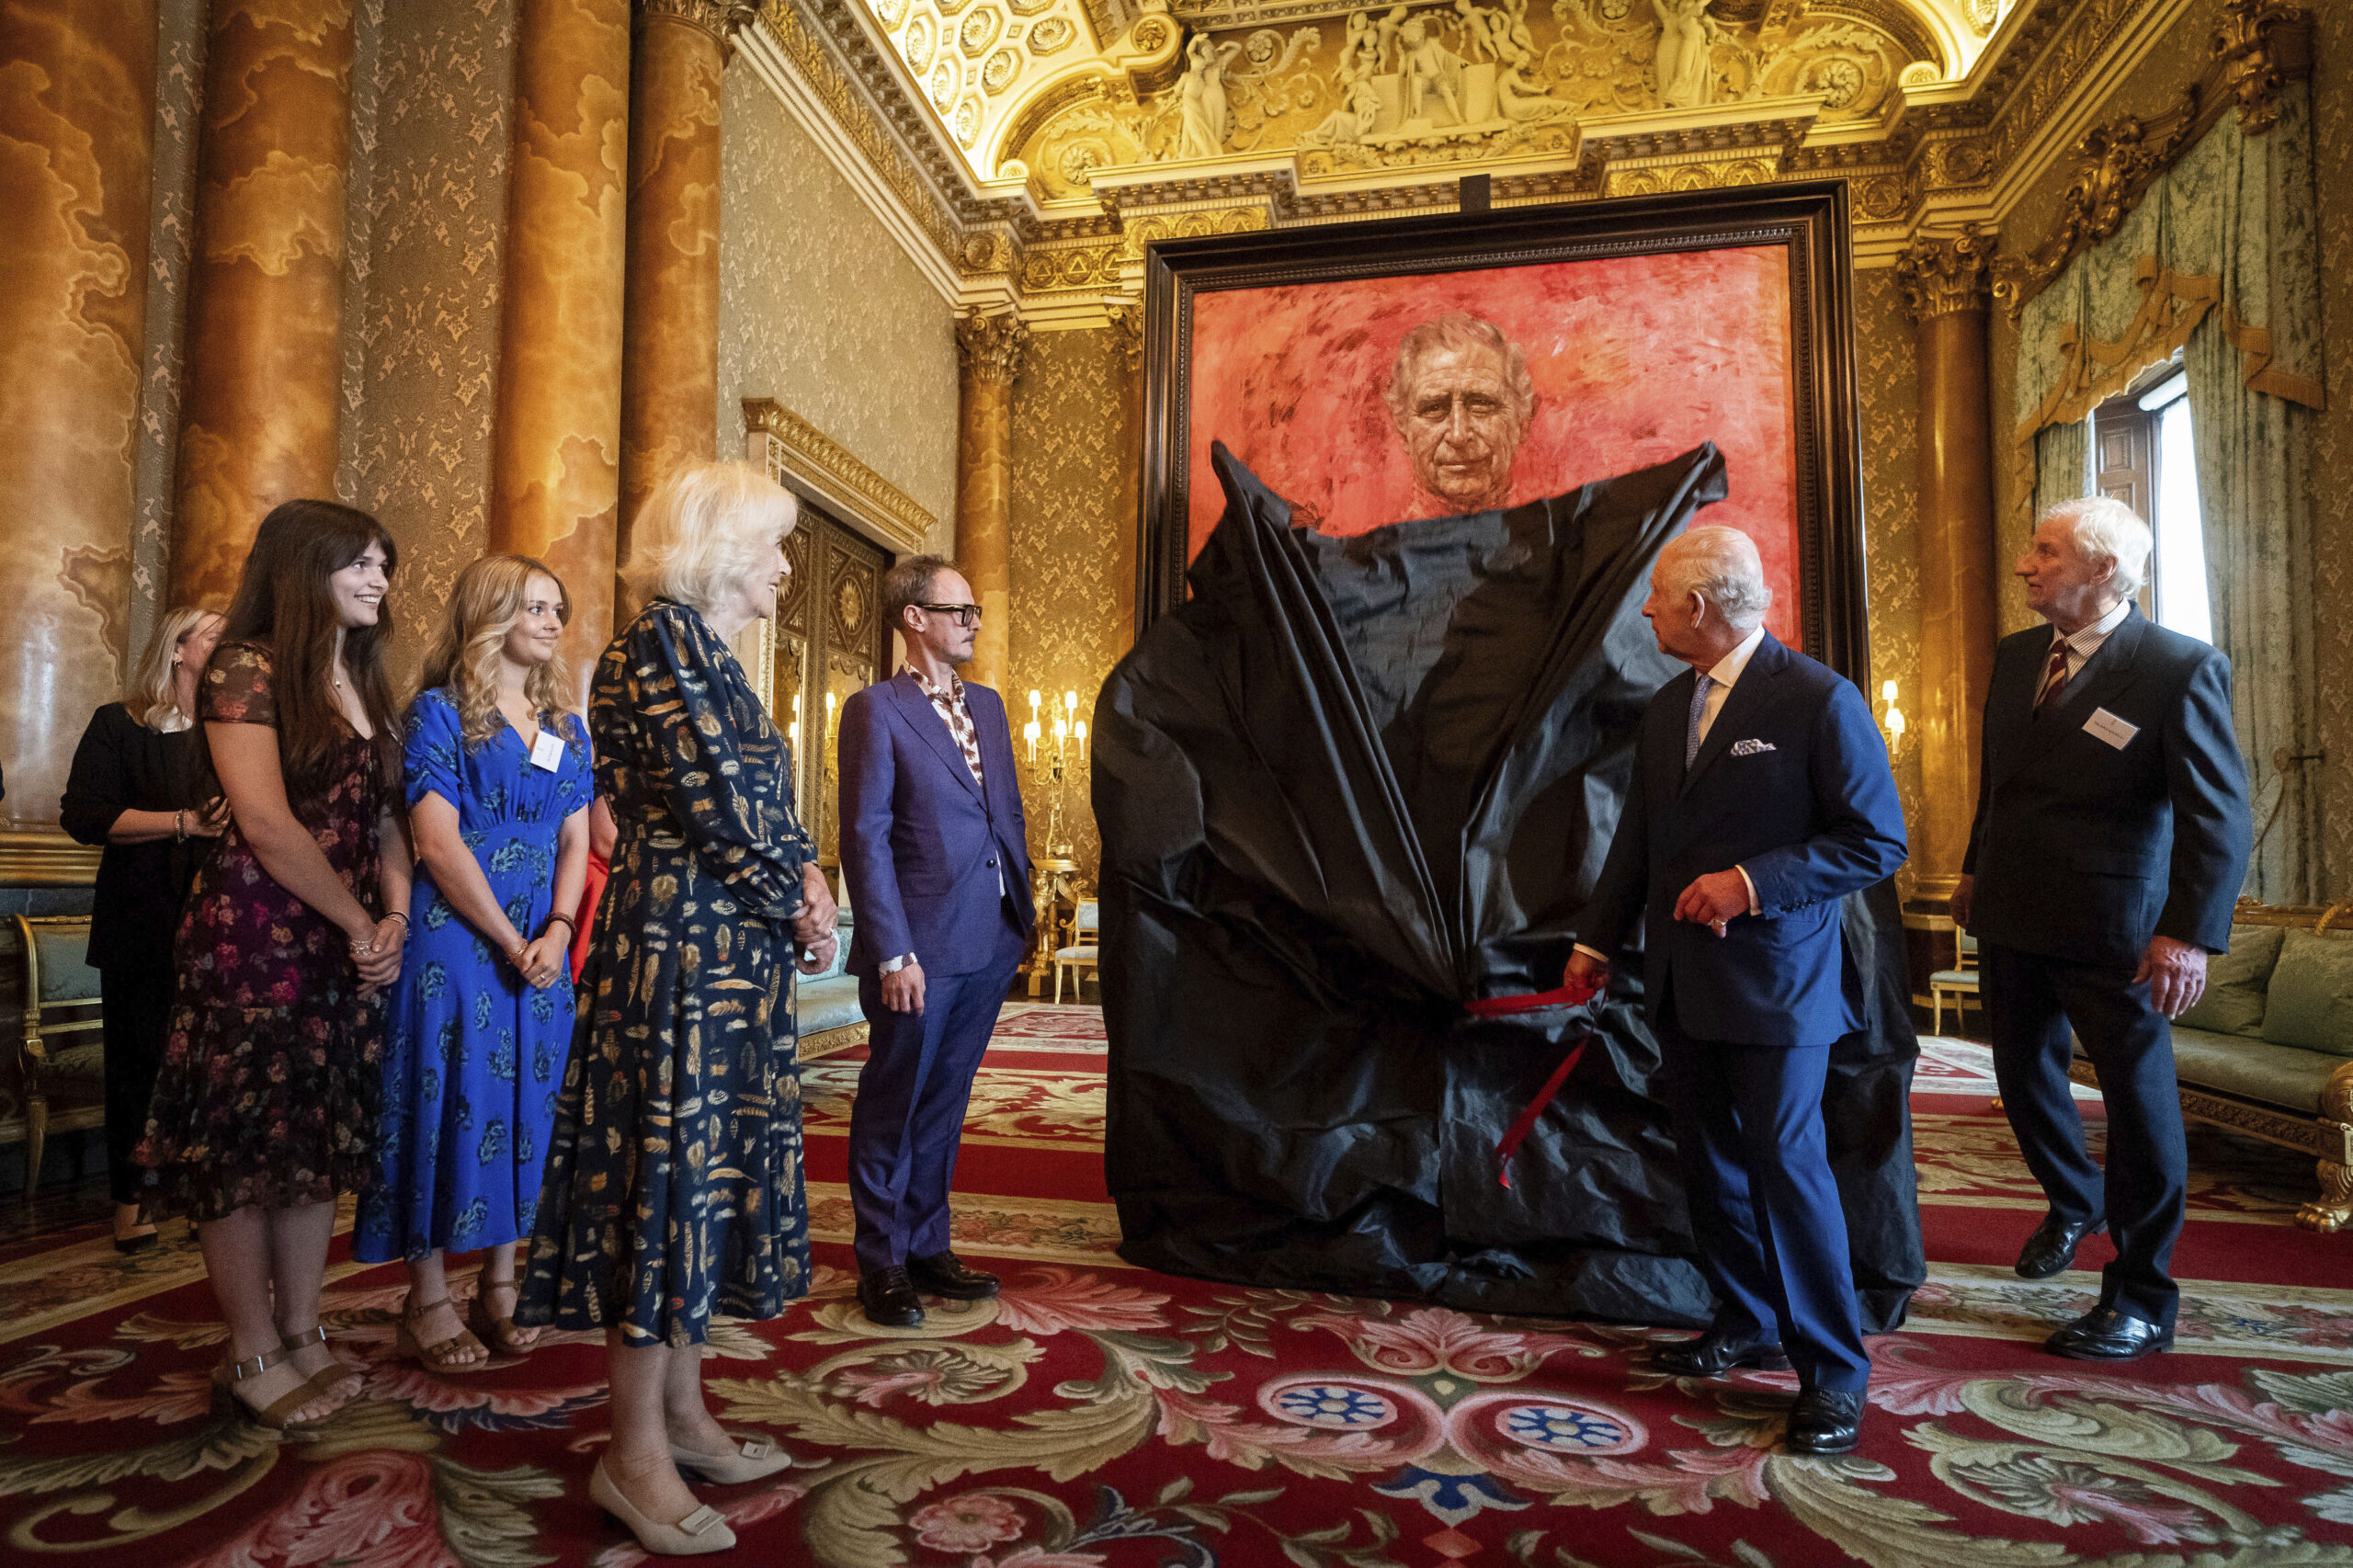 Britain's King Charles III and Queen Camilla at the unveiling of artist Jonathan Yeo's portrait of the King, in the blue drawing room at Buckingham Palace, in London, Tuesday May 14, 2024. The portrait was commissioned in 2020 to celebrate the then Prince of Wales's 50 years as a member of The Drapers' Company in 2022. The artwork depicts the King wearing the uniform of the Welsh Guards, of which he was made Regimental Colonel in 1975. The canvas size - approximately 8.5 by 6.5 feet when framed - was carefully considered to fit within the architecture of Drapers' Hall and the context of the paintings it will eventually hang alongside. (Aaron Chown/Pool Photo via AP)